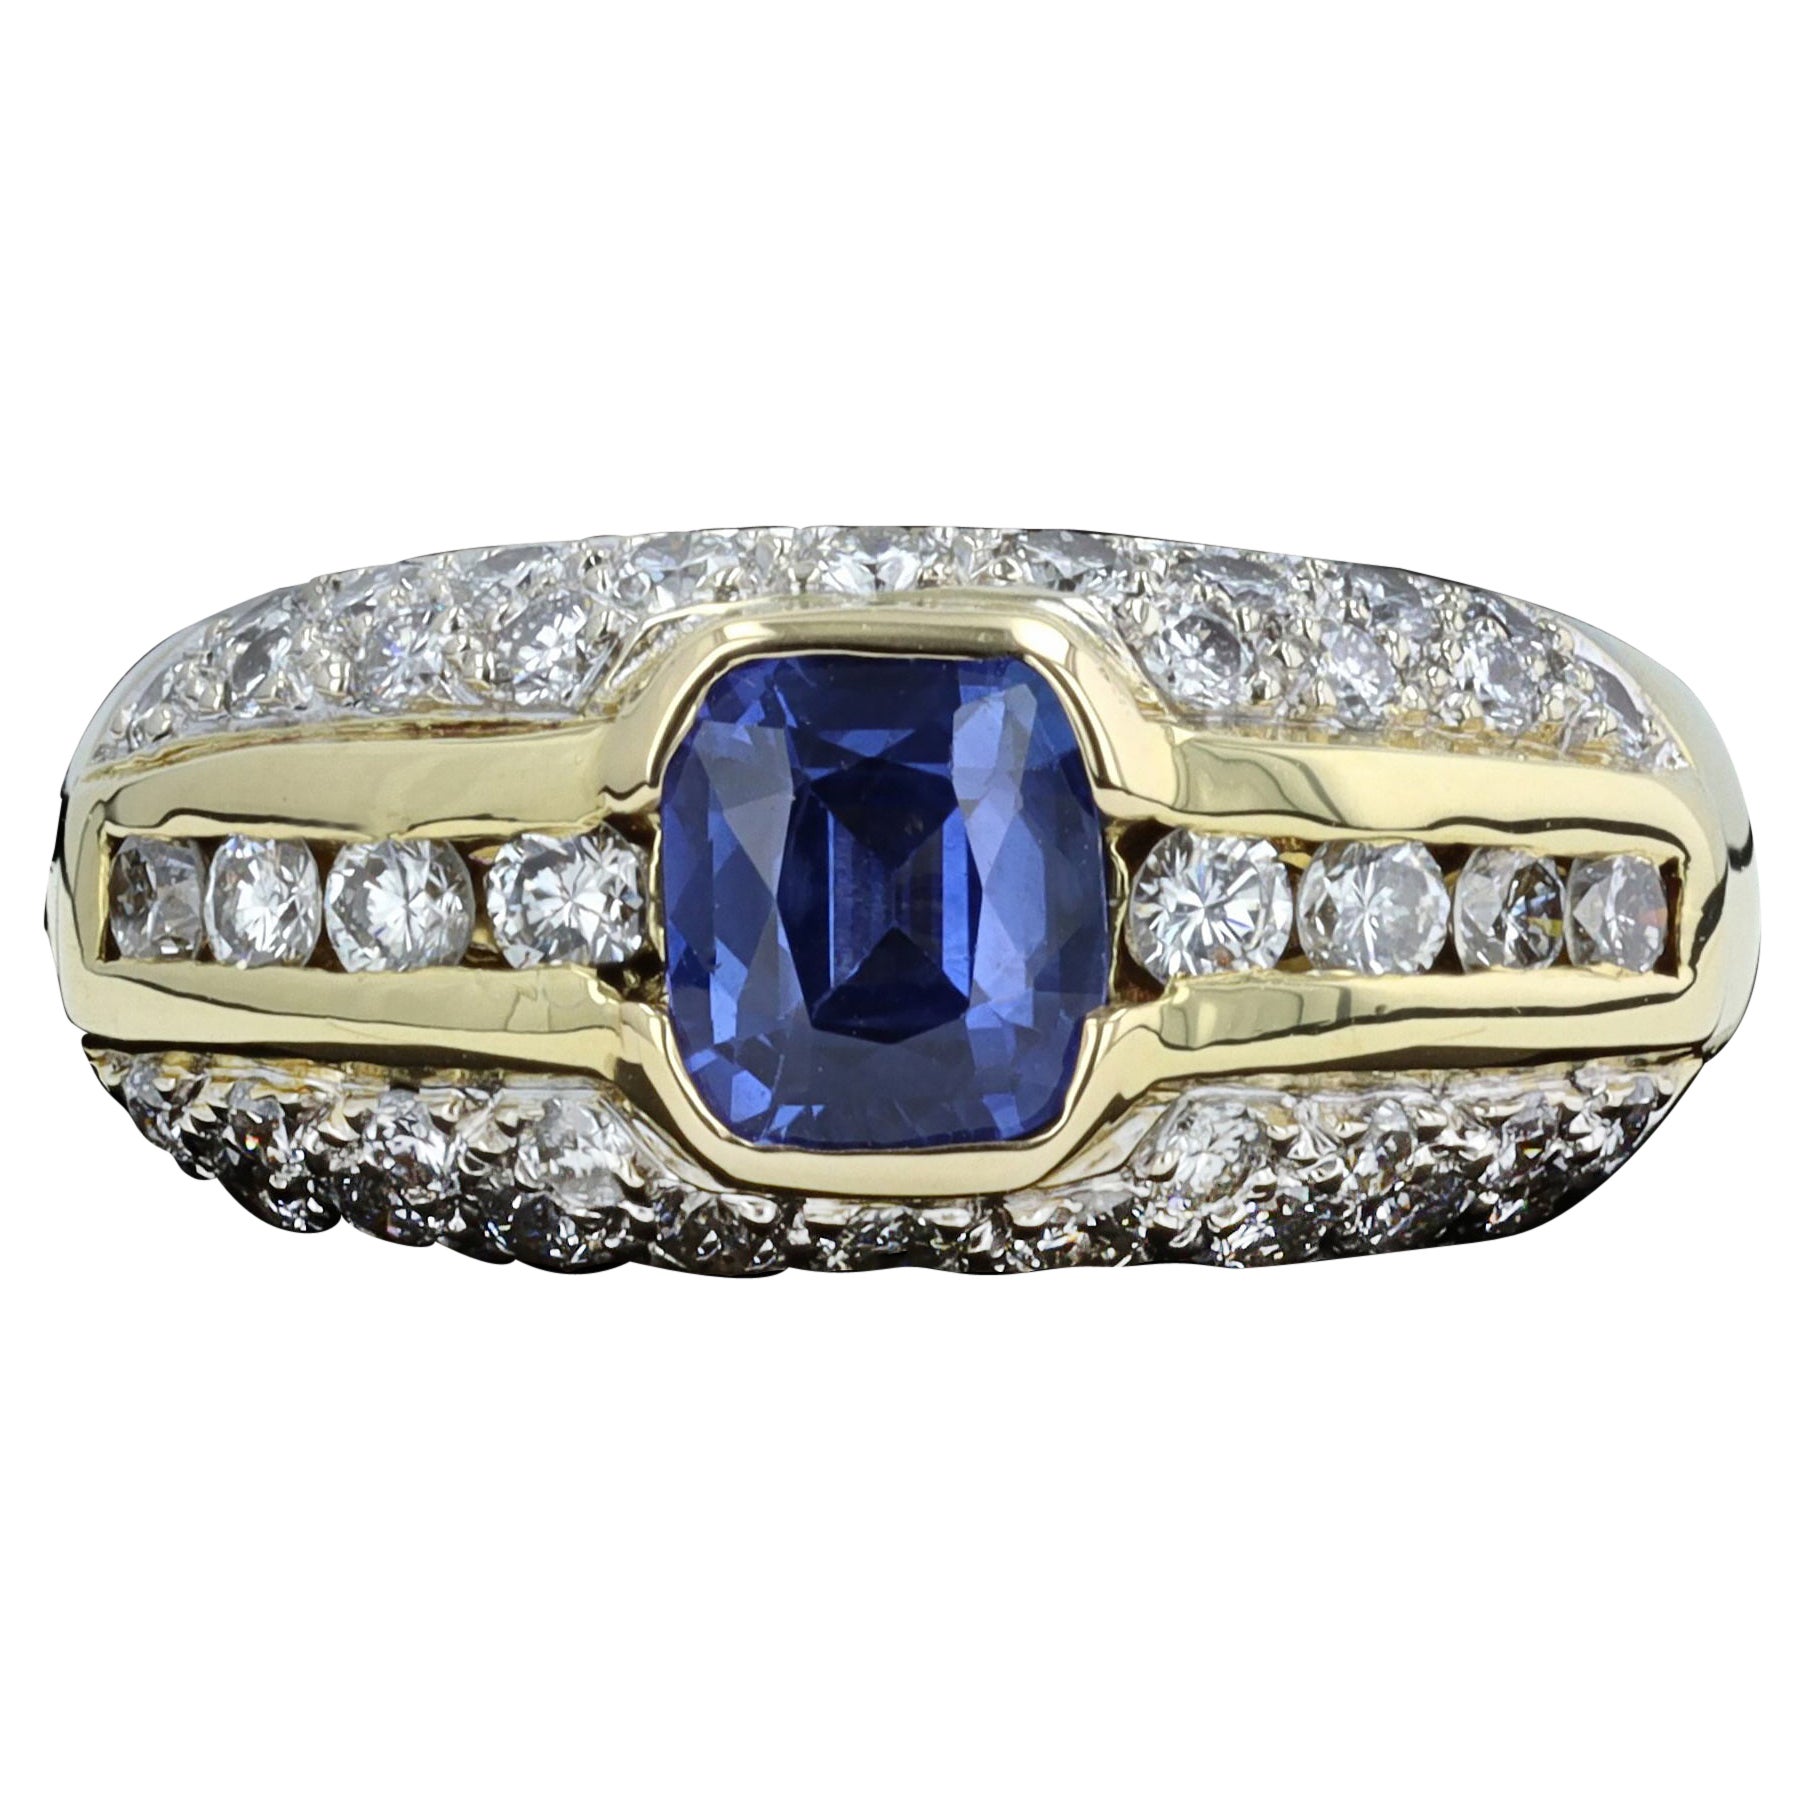 Vintage Italian Crafted Sapphire and Diamond Ring